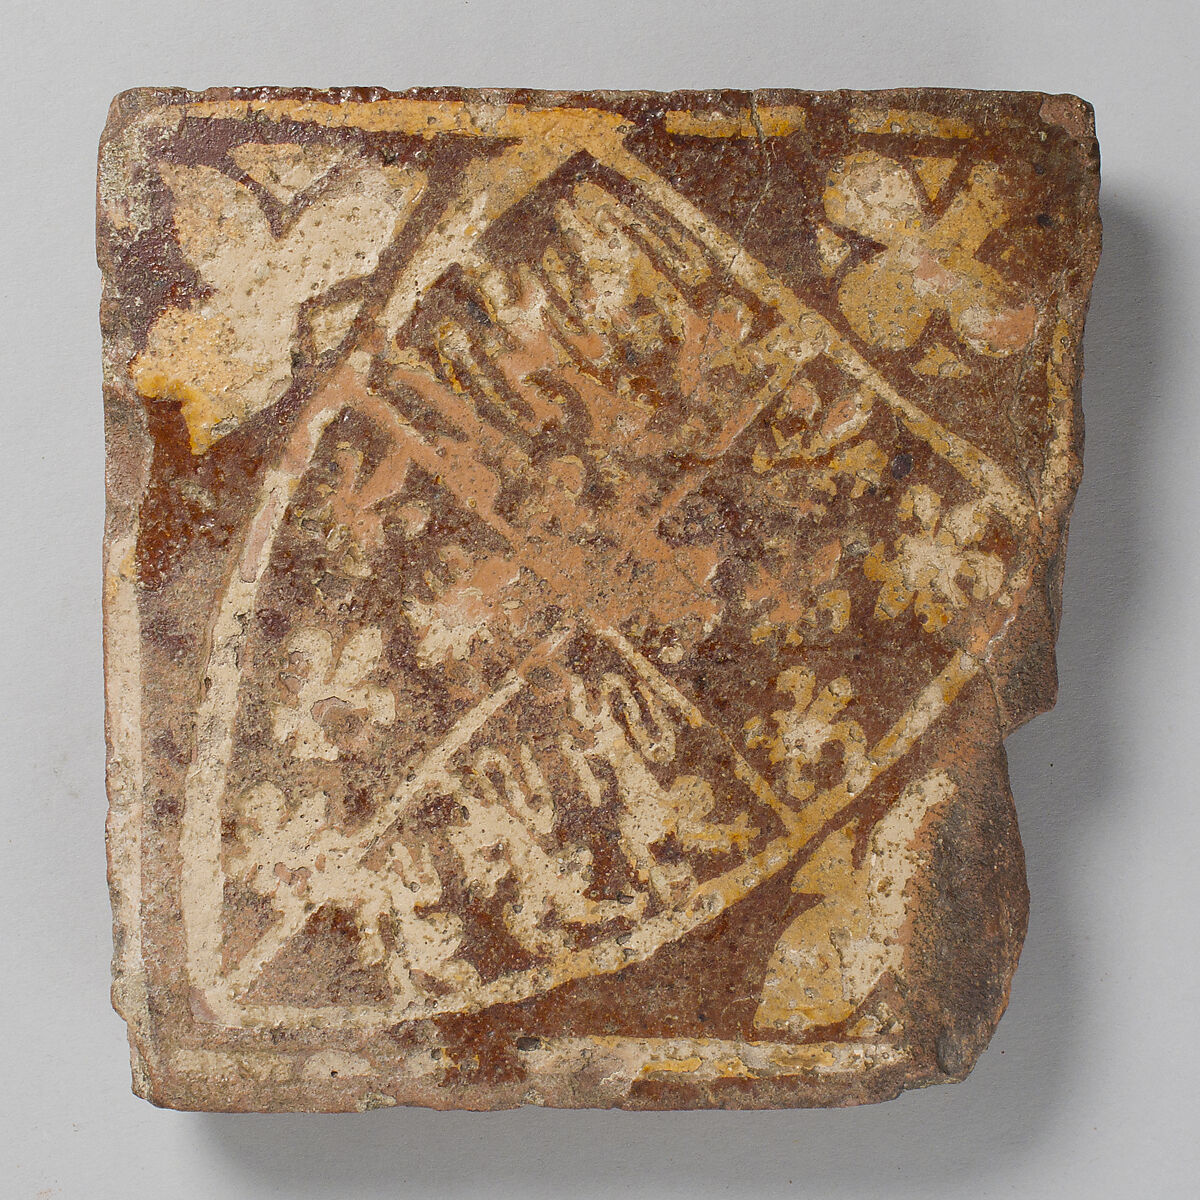 Two-Colored Tile, Fired earthenware with slip decoration and lead glaze, British 